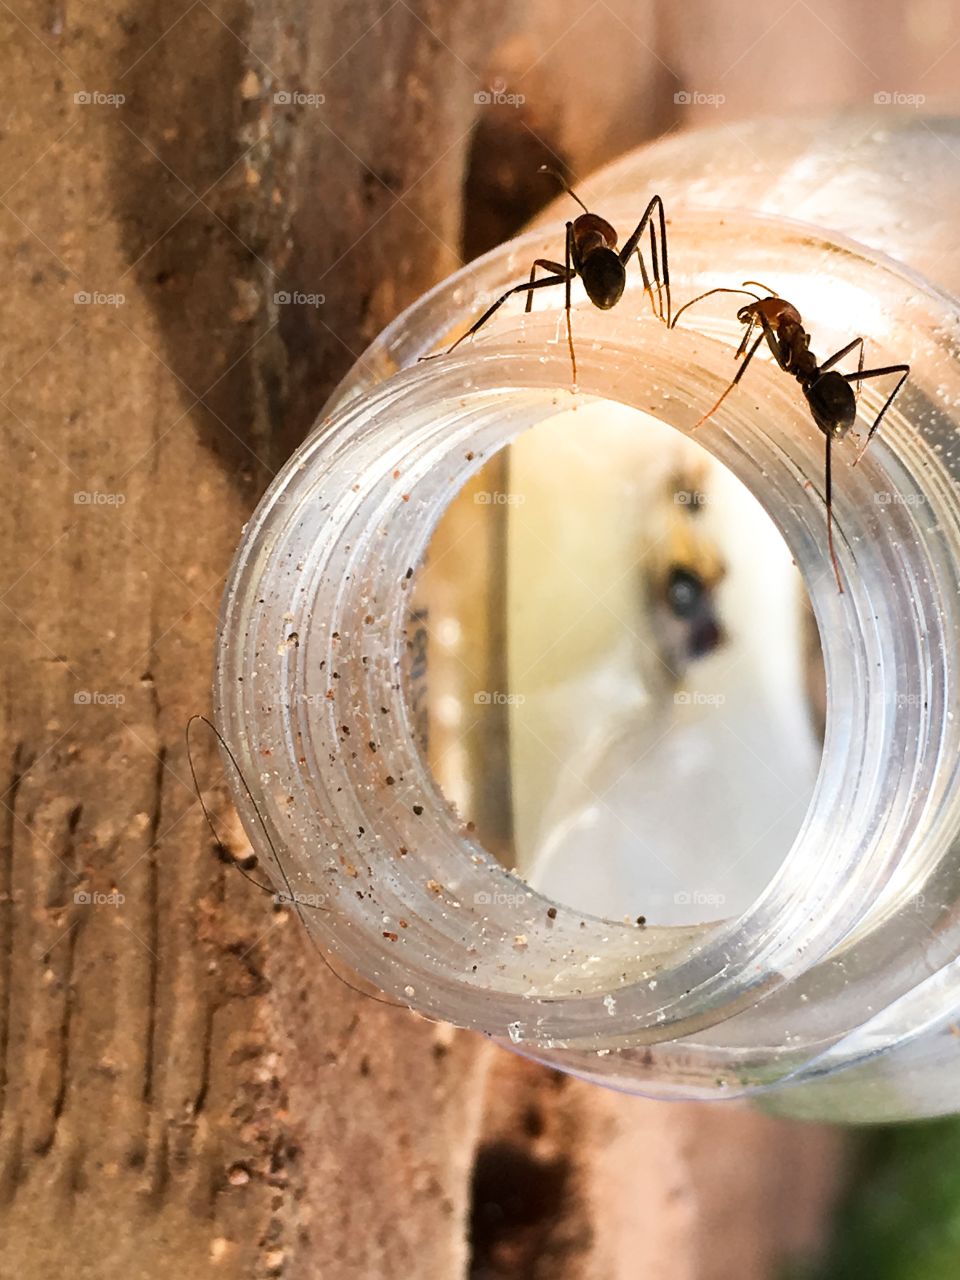 Two worker ants in outer rim of of glass jar, blurred view of dead ants at bottom of jar